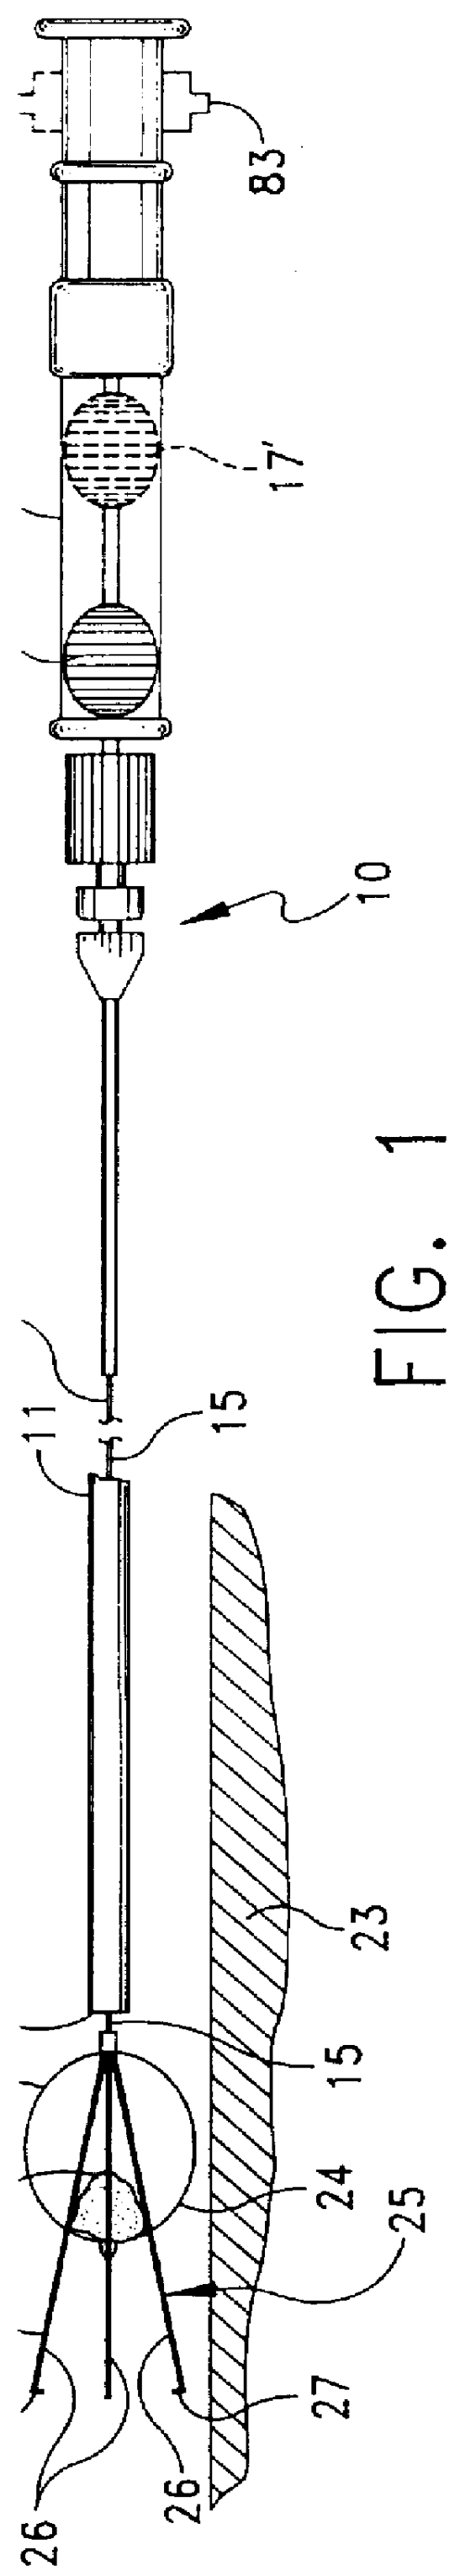 Method and apparatus for severing and capturing polyps